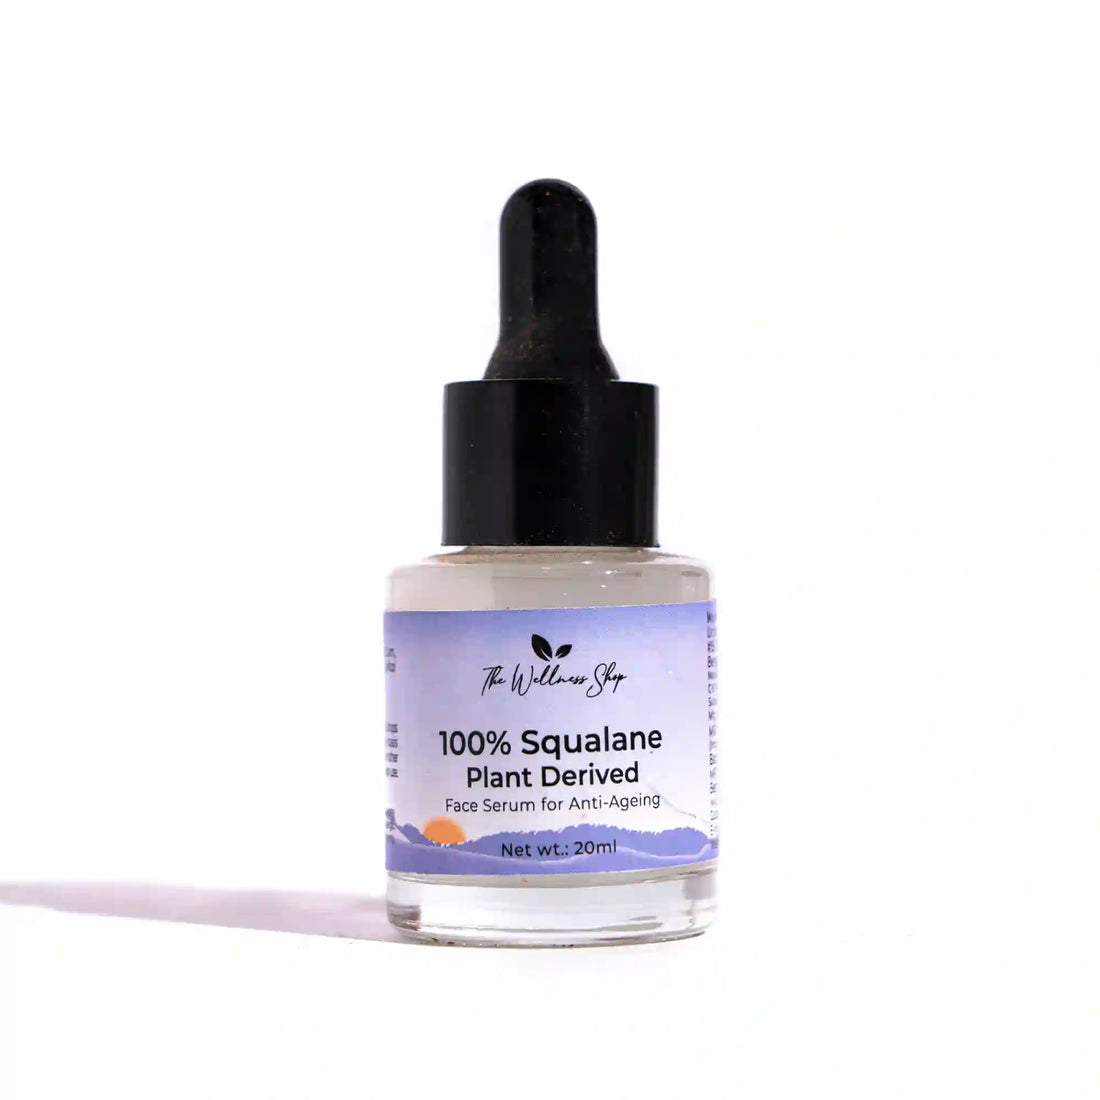 100% SQUALANE PLANT DERIVED: FACE SERUM FOR ANTI- AGING